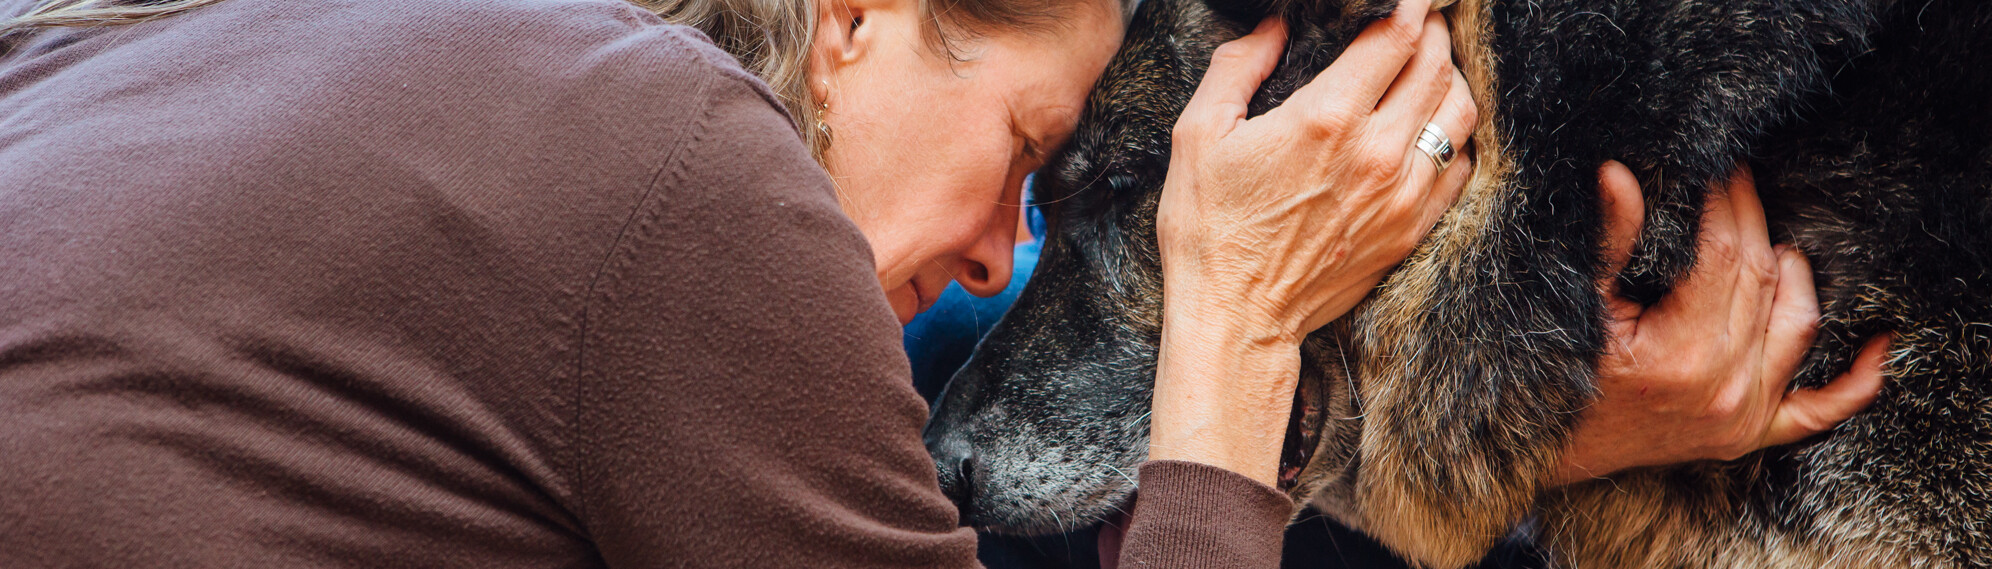 Woman with Her Forehead Gently on a Dog's Head